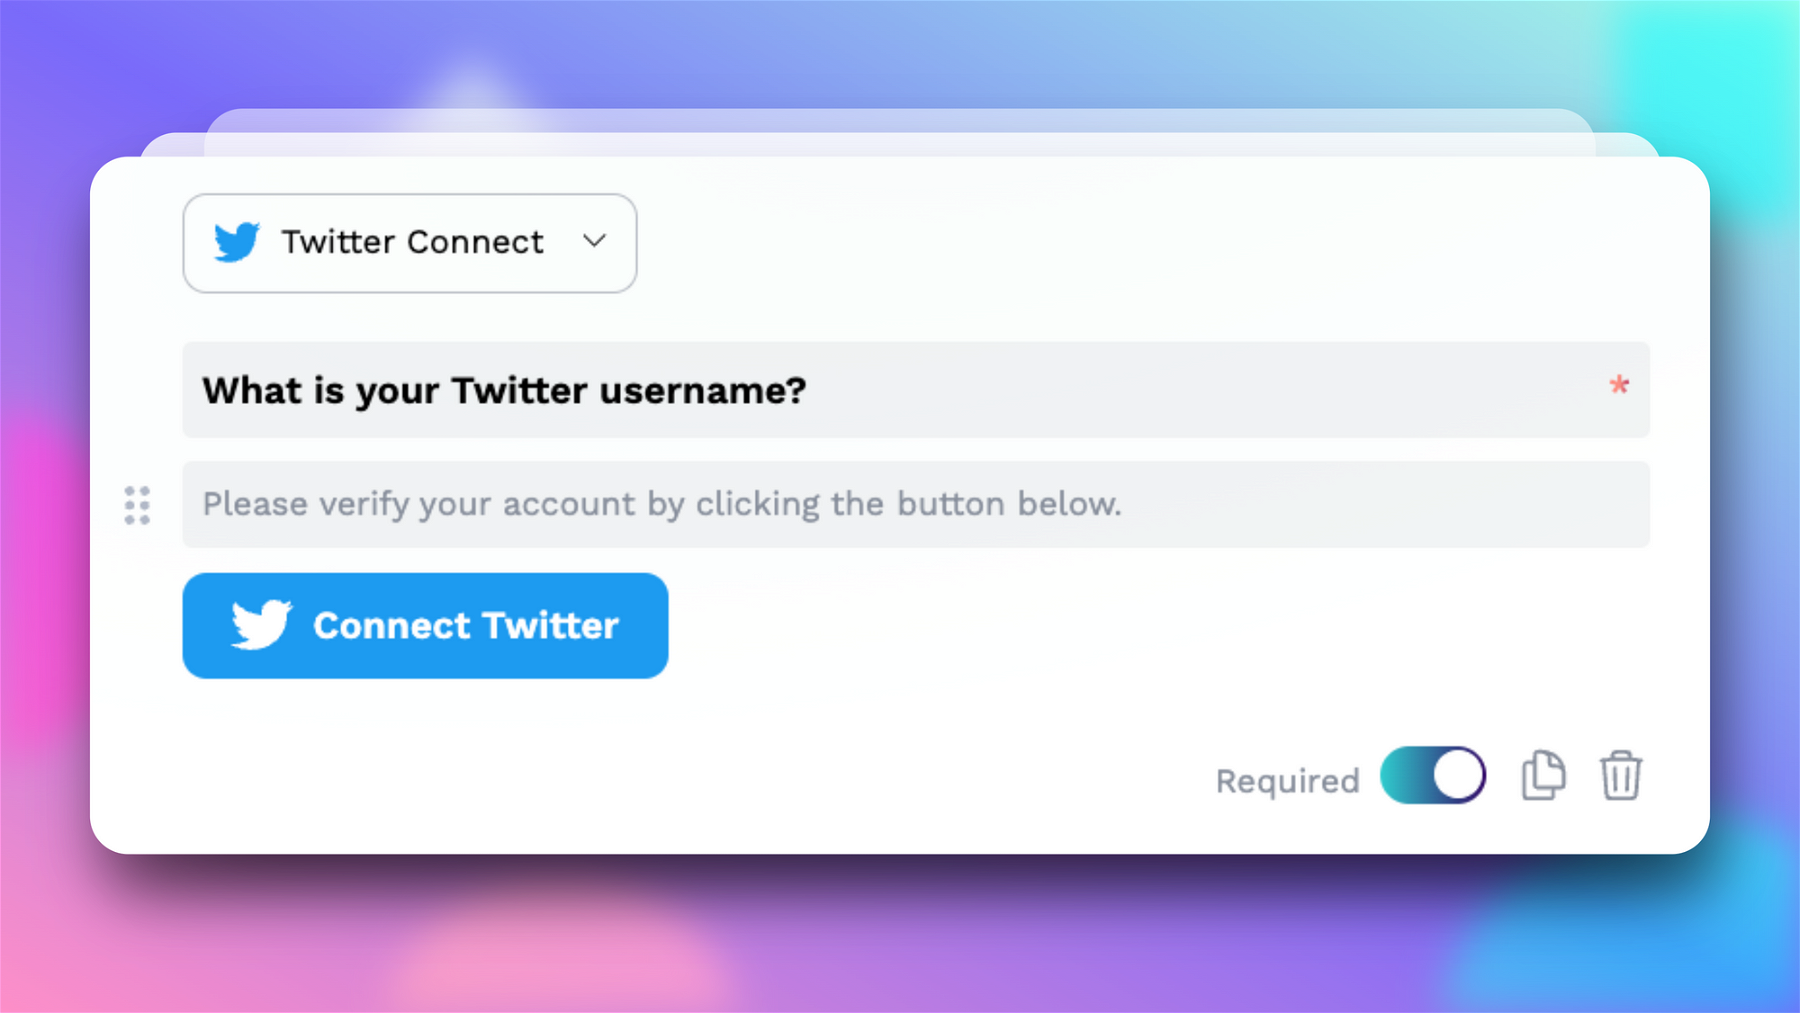 This is how the Twitter Connect option looks by default during edit mode. You can make it a requirement on your form by toggling the “Required” switch to on.